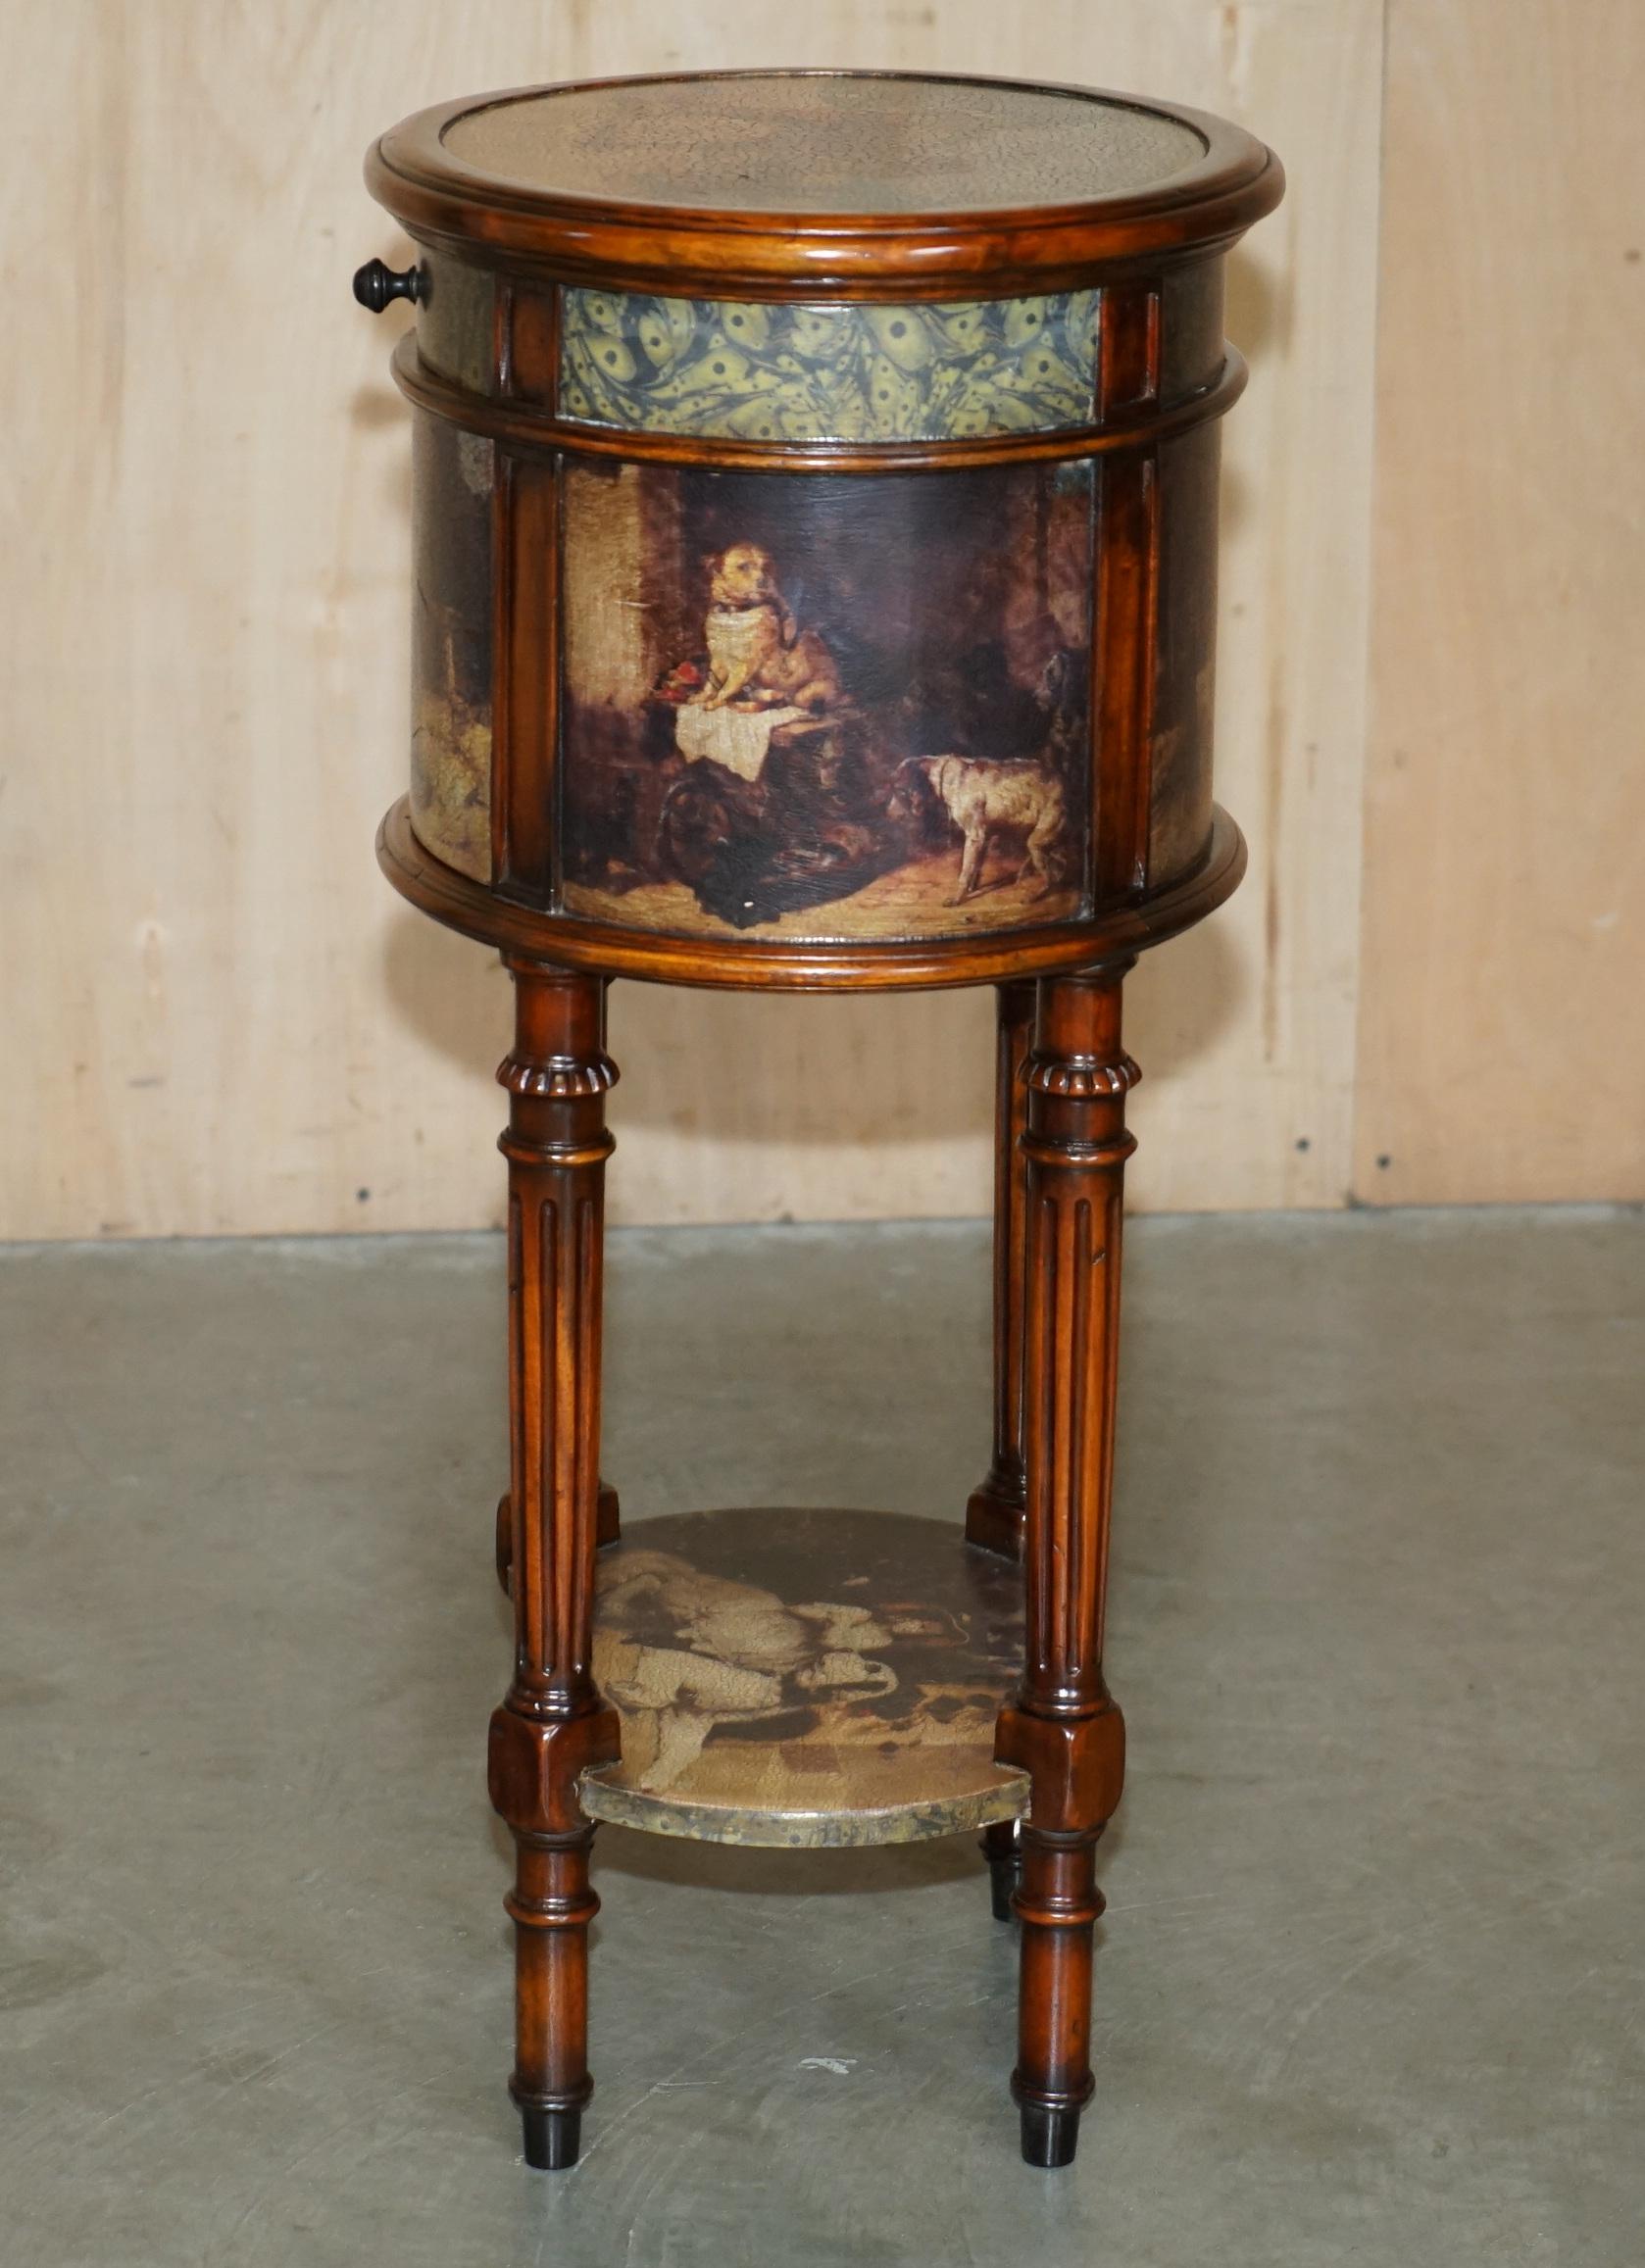 EXQUISITE TWO TIER TALL SiDE TABLE CABINET LEATHER CLADDED & PAINTED WITH DOGS For Sale 6